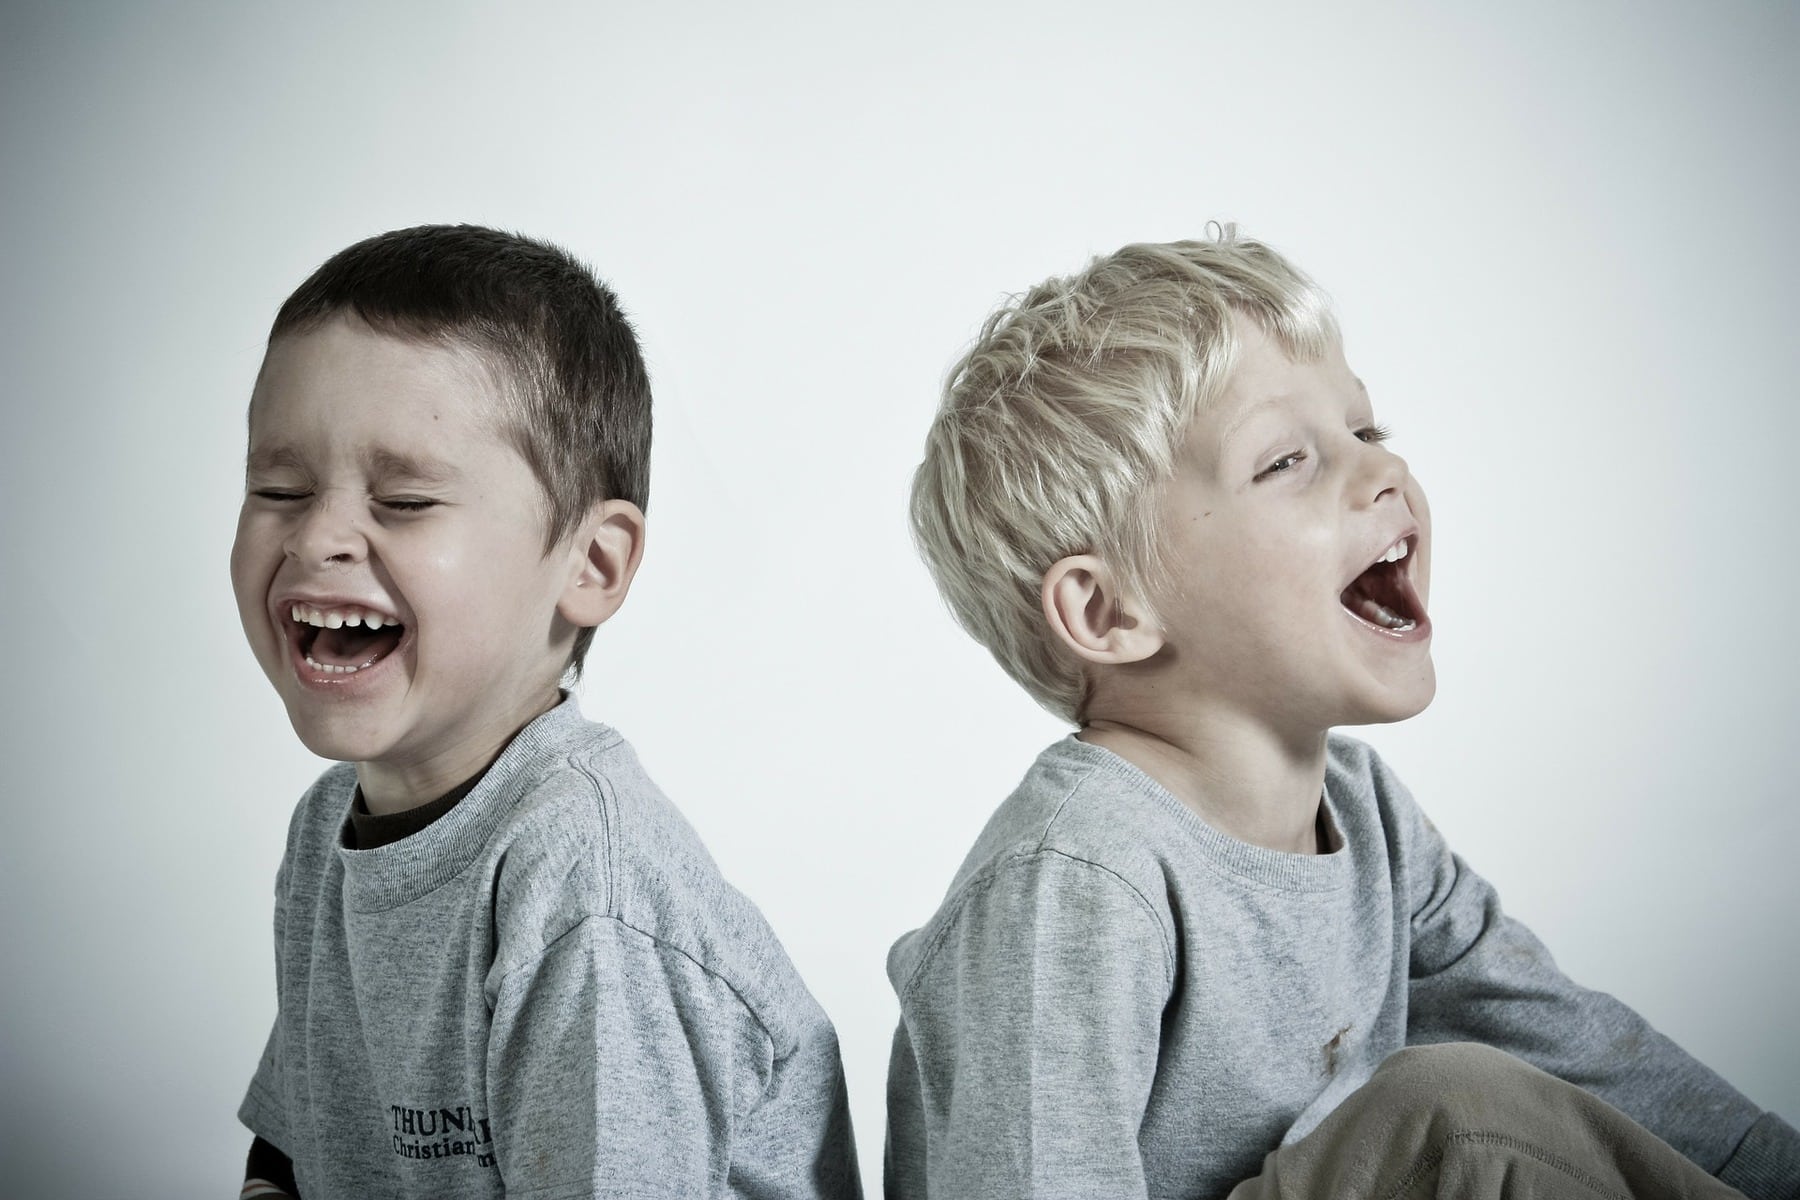 60 Jokes For Kiddos That Will Have Them Rolling On The Floor Laughing